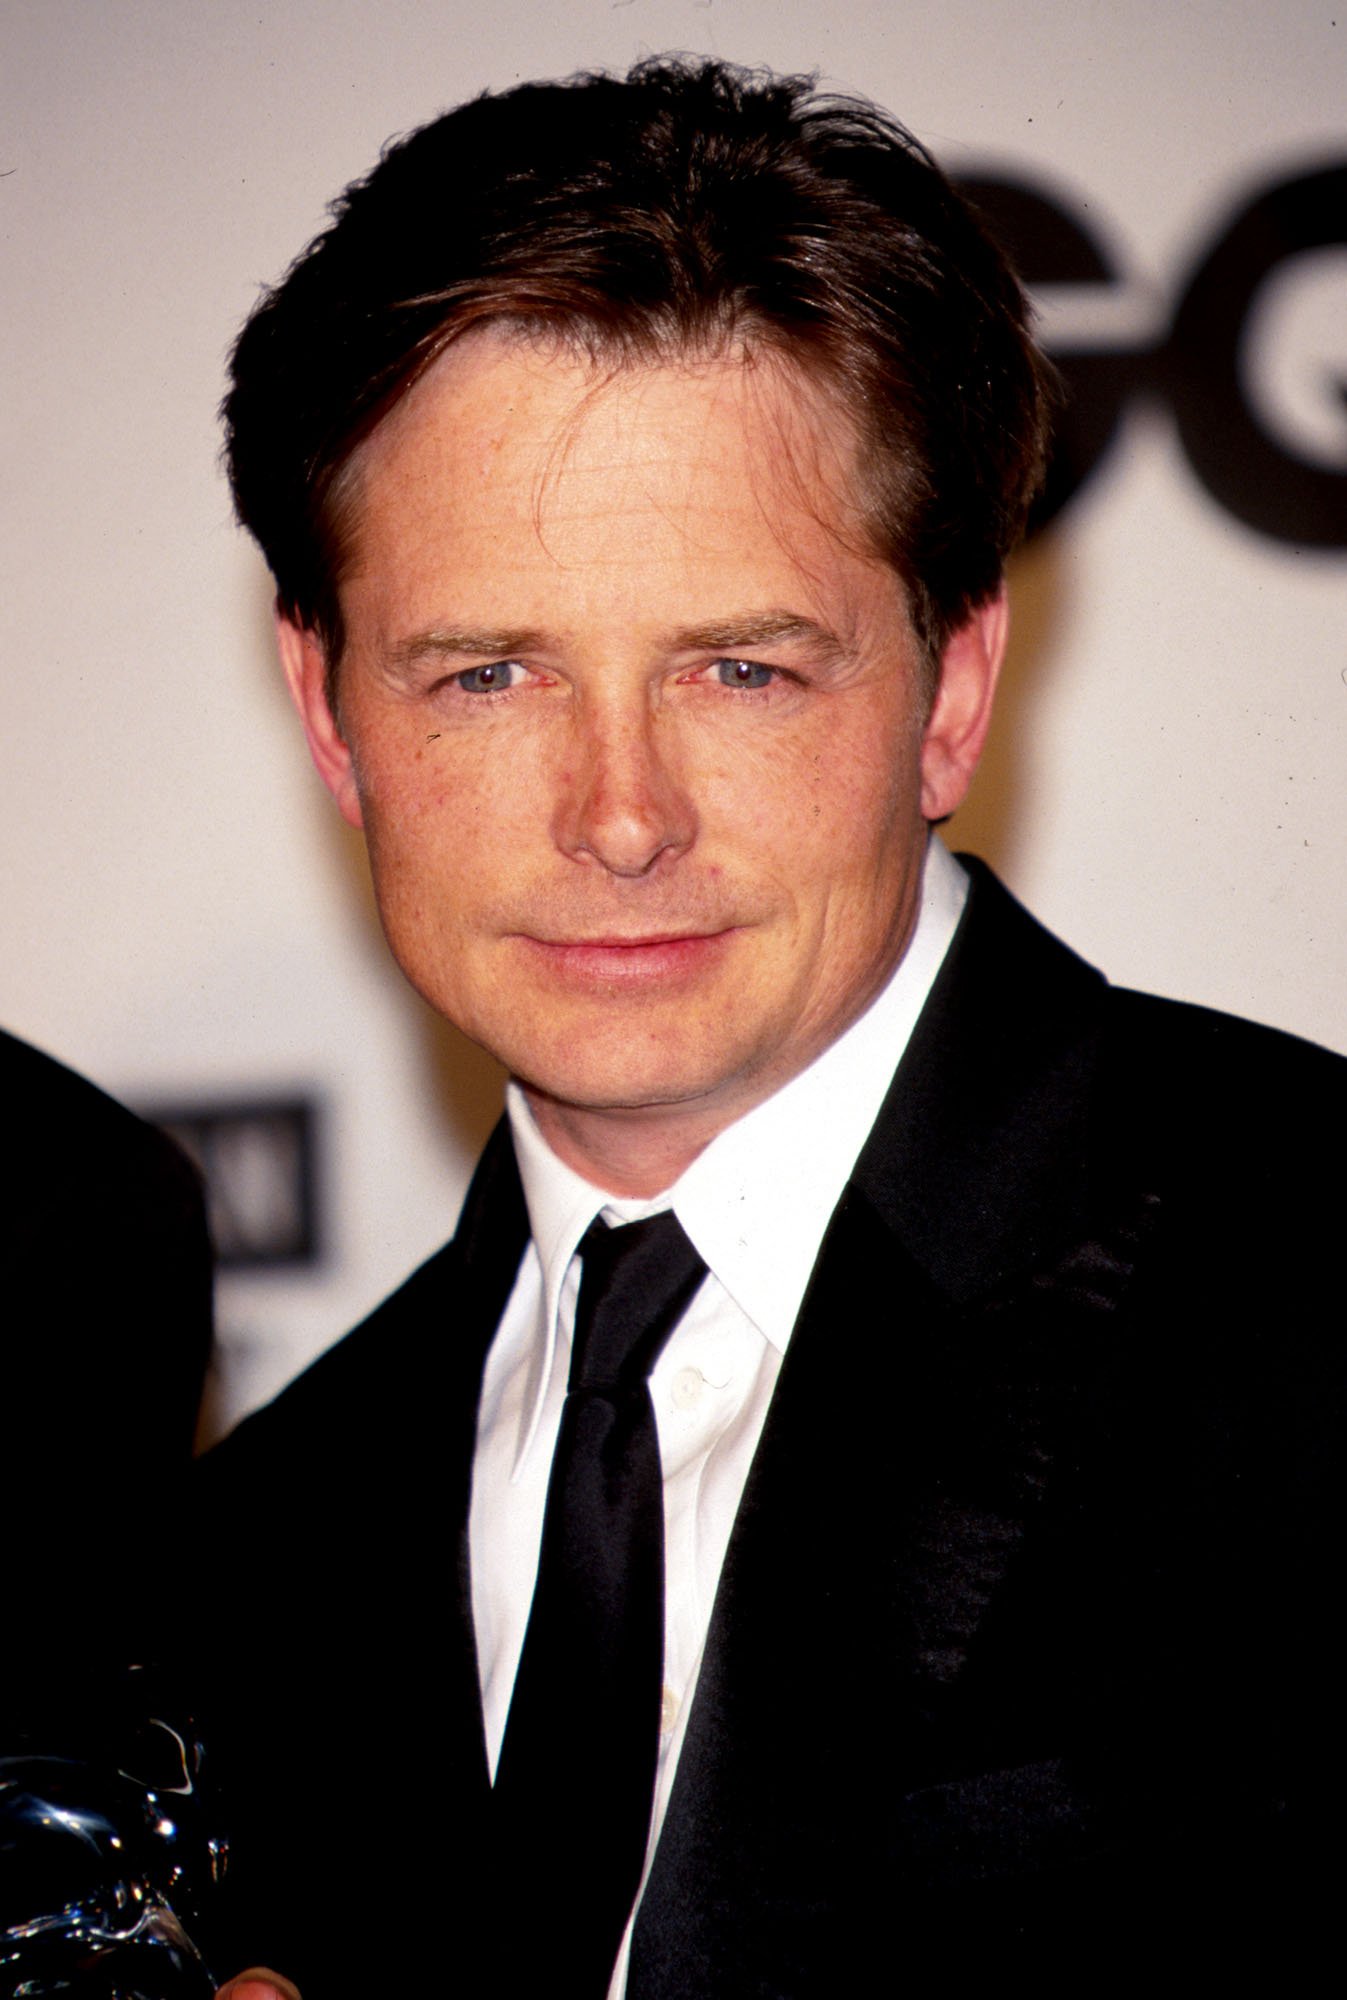 Michael J. Fox at the GQ Magazine's 4th Annual "Men of the Year" Awards, October 21, 1999, NYC, New York. | Source: Getty Images.